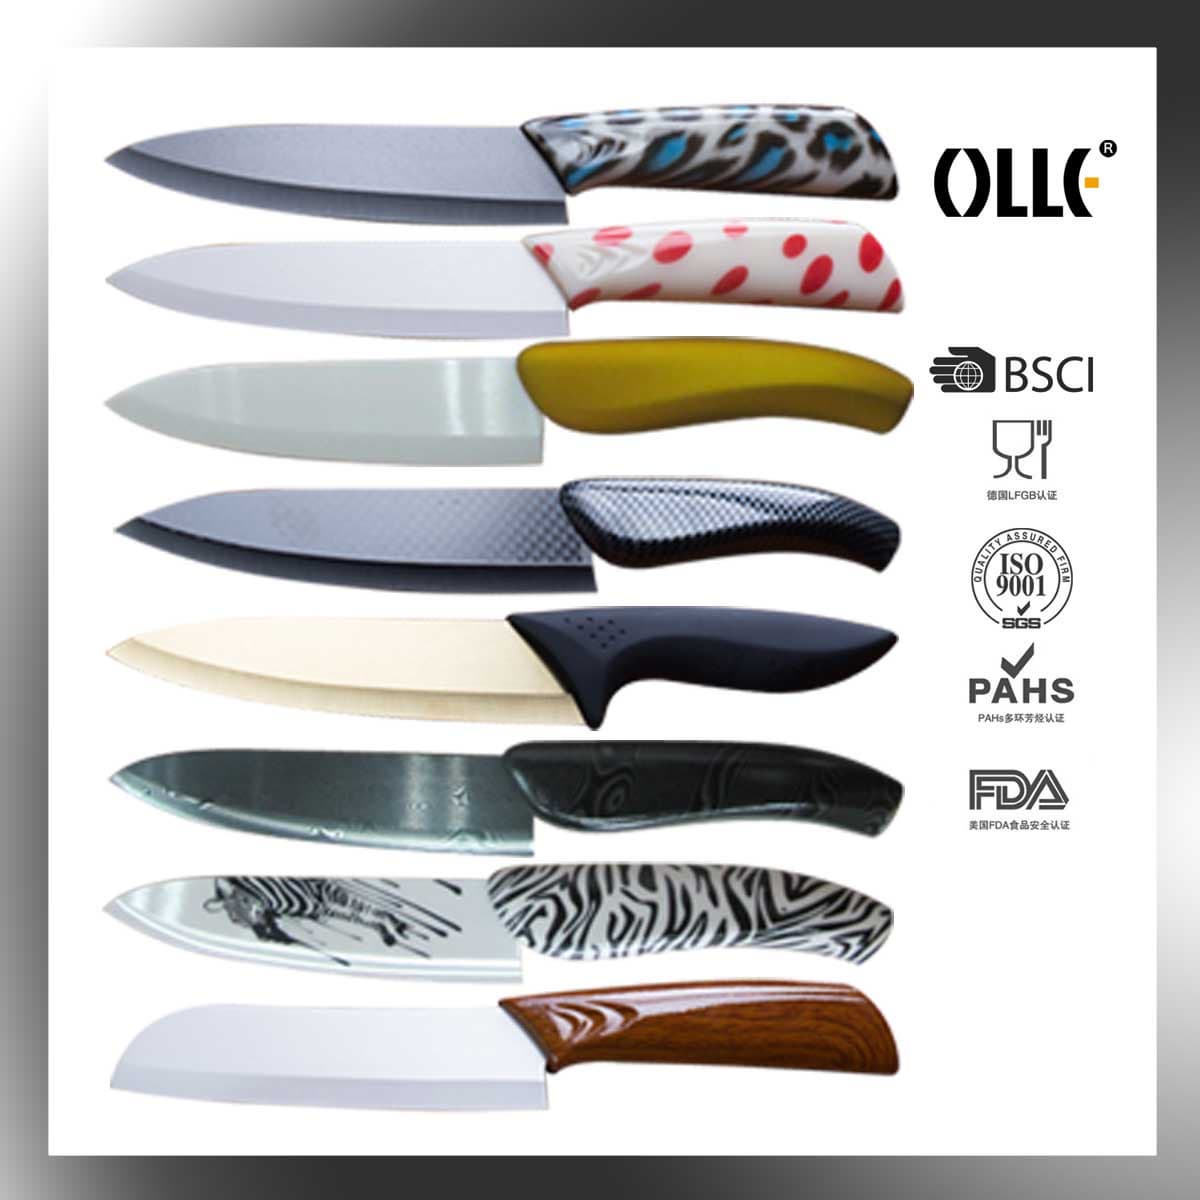 2014 New Product Olle New Ceramic Knife